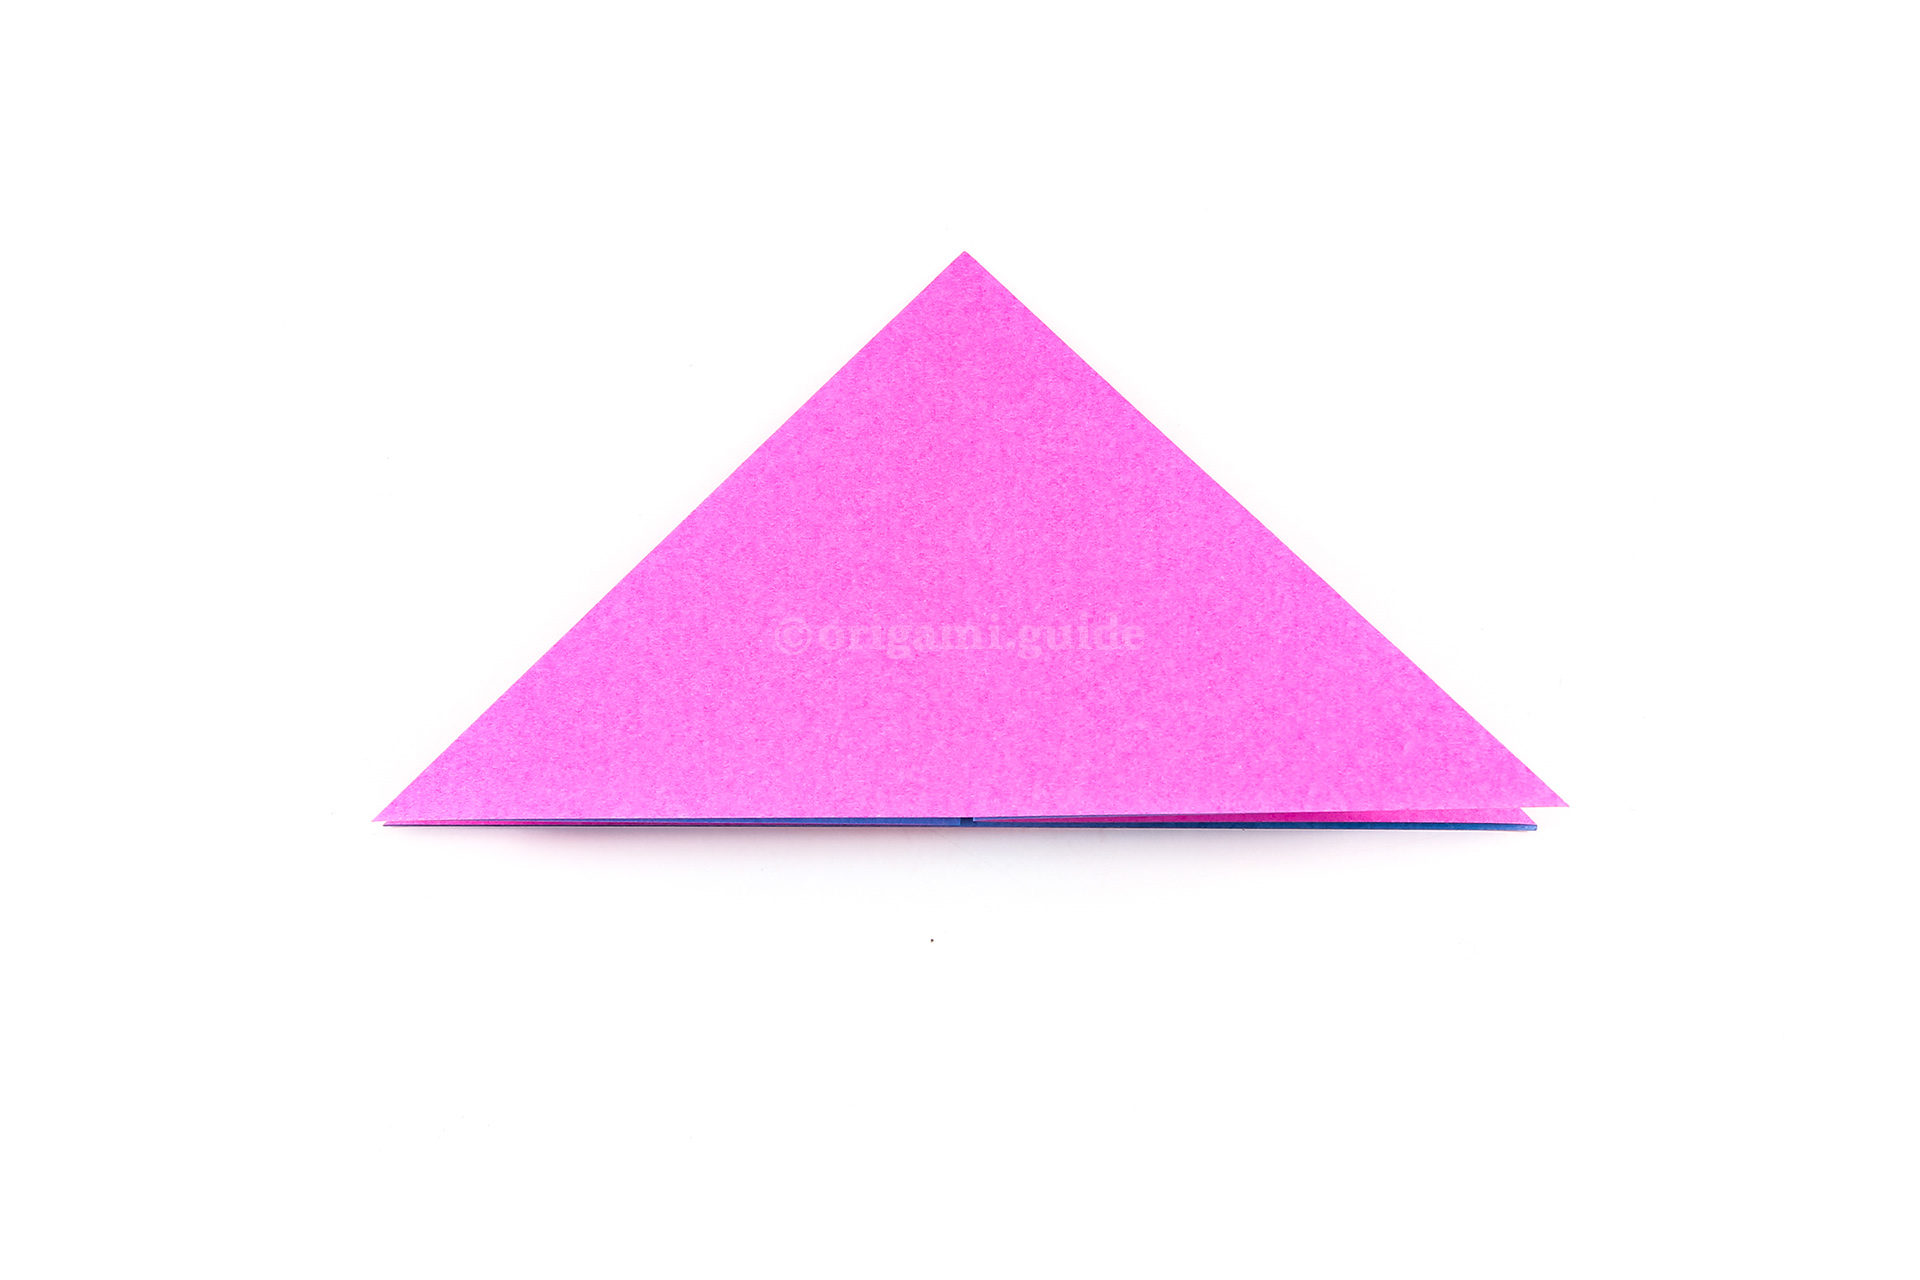 Flatten the paper into a triangle, this is the completed origami water bomb base.